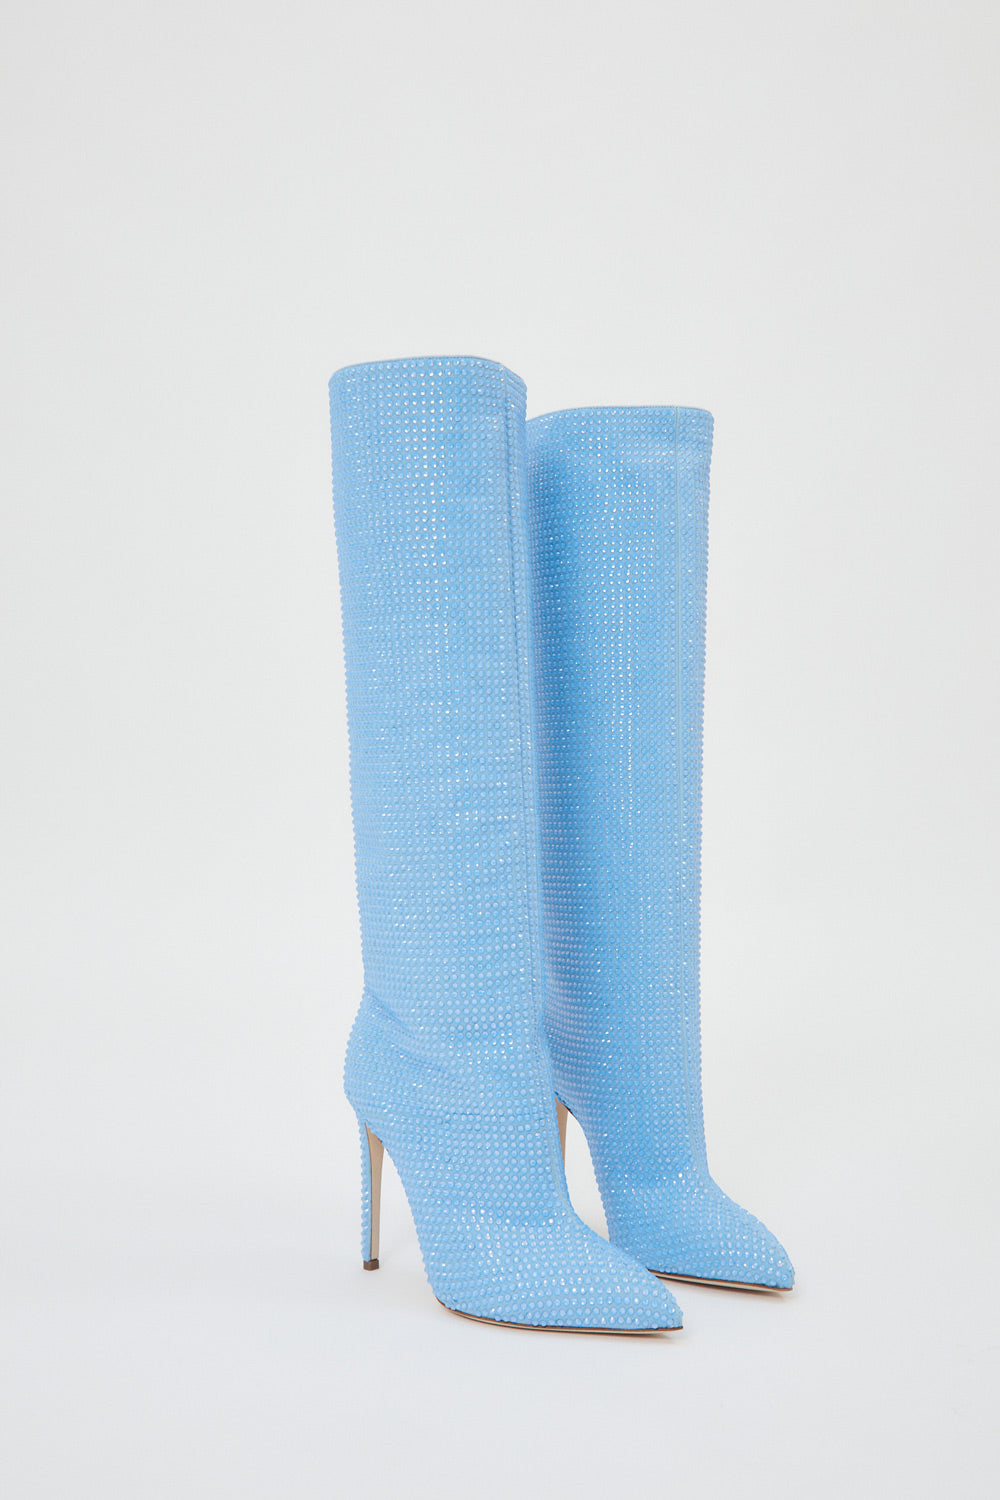 Holly Blue Opal Stiletto Crystal Boots